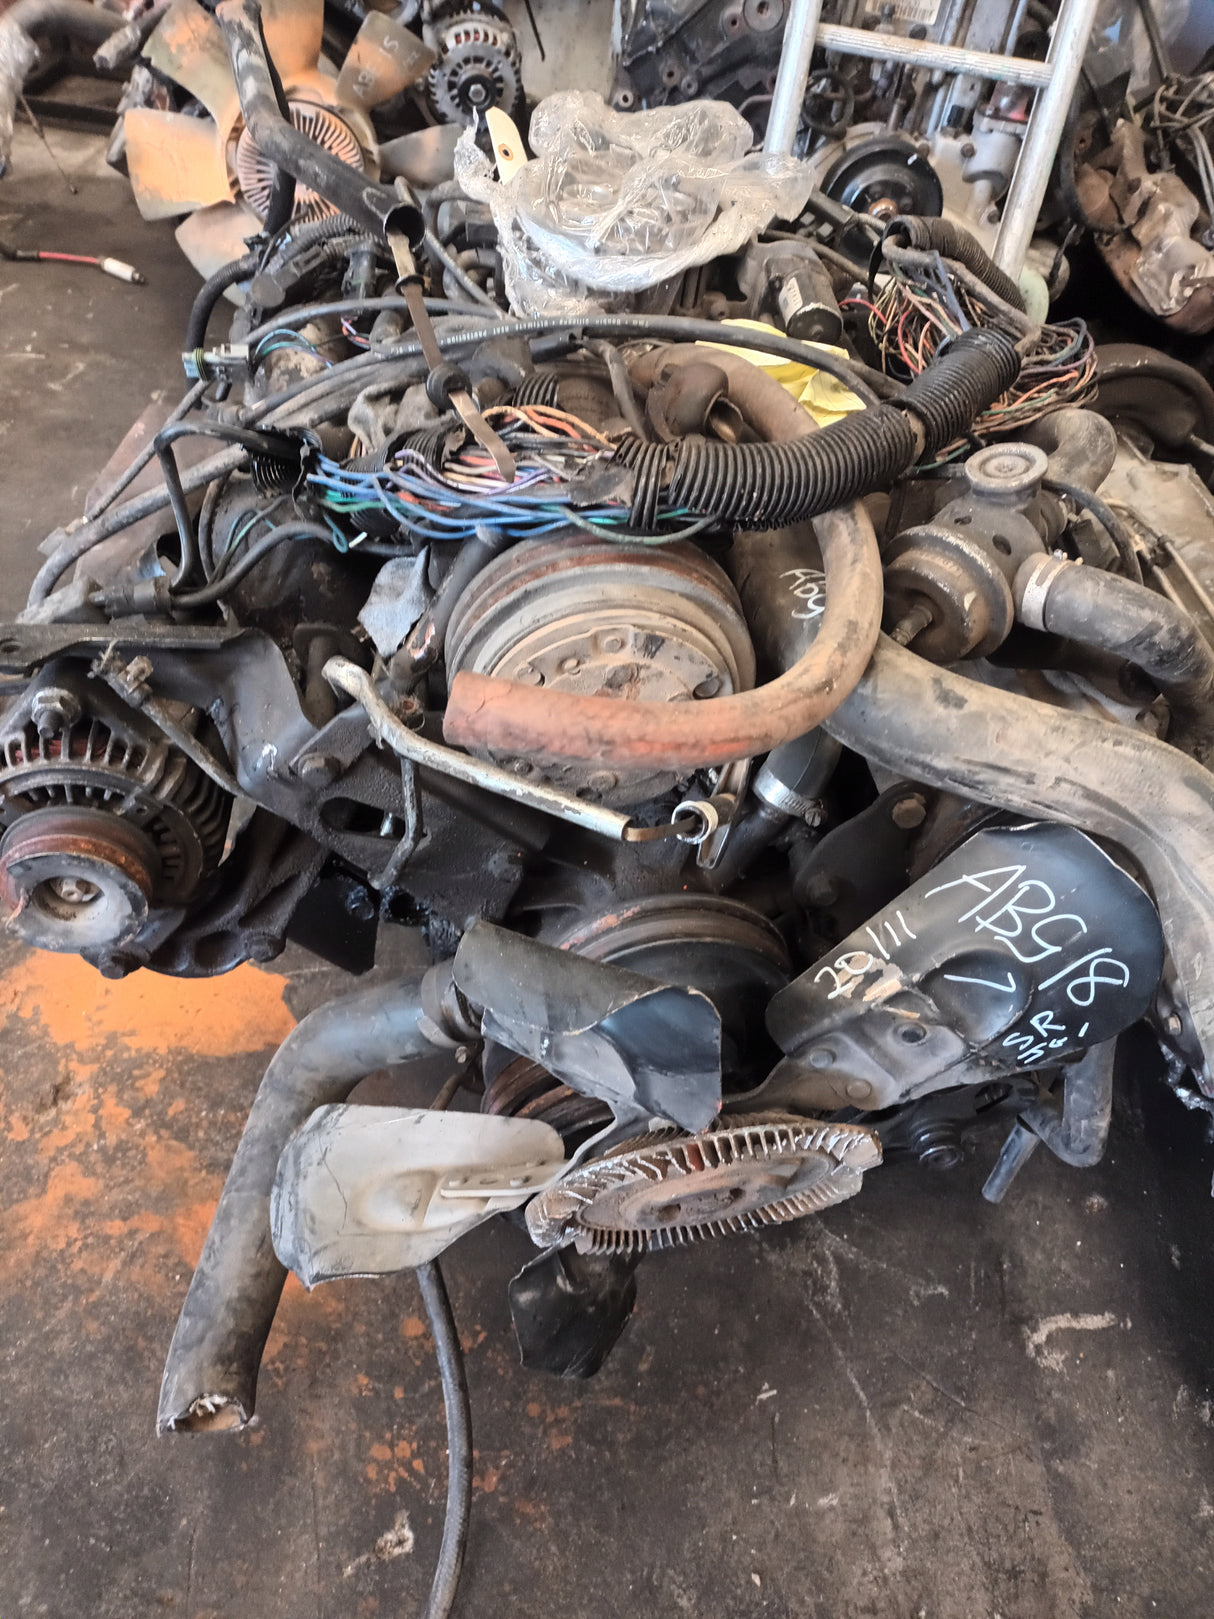 DODGE 318 USED CONDITION GOOD FOR REBUILDING DAMAGED DIZZY & FAN ASSY CRACKED EXHAUST MANIFOLD